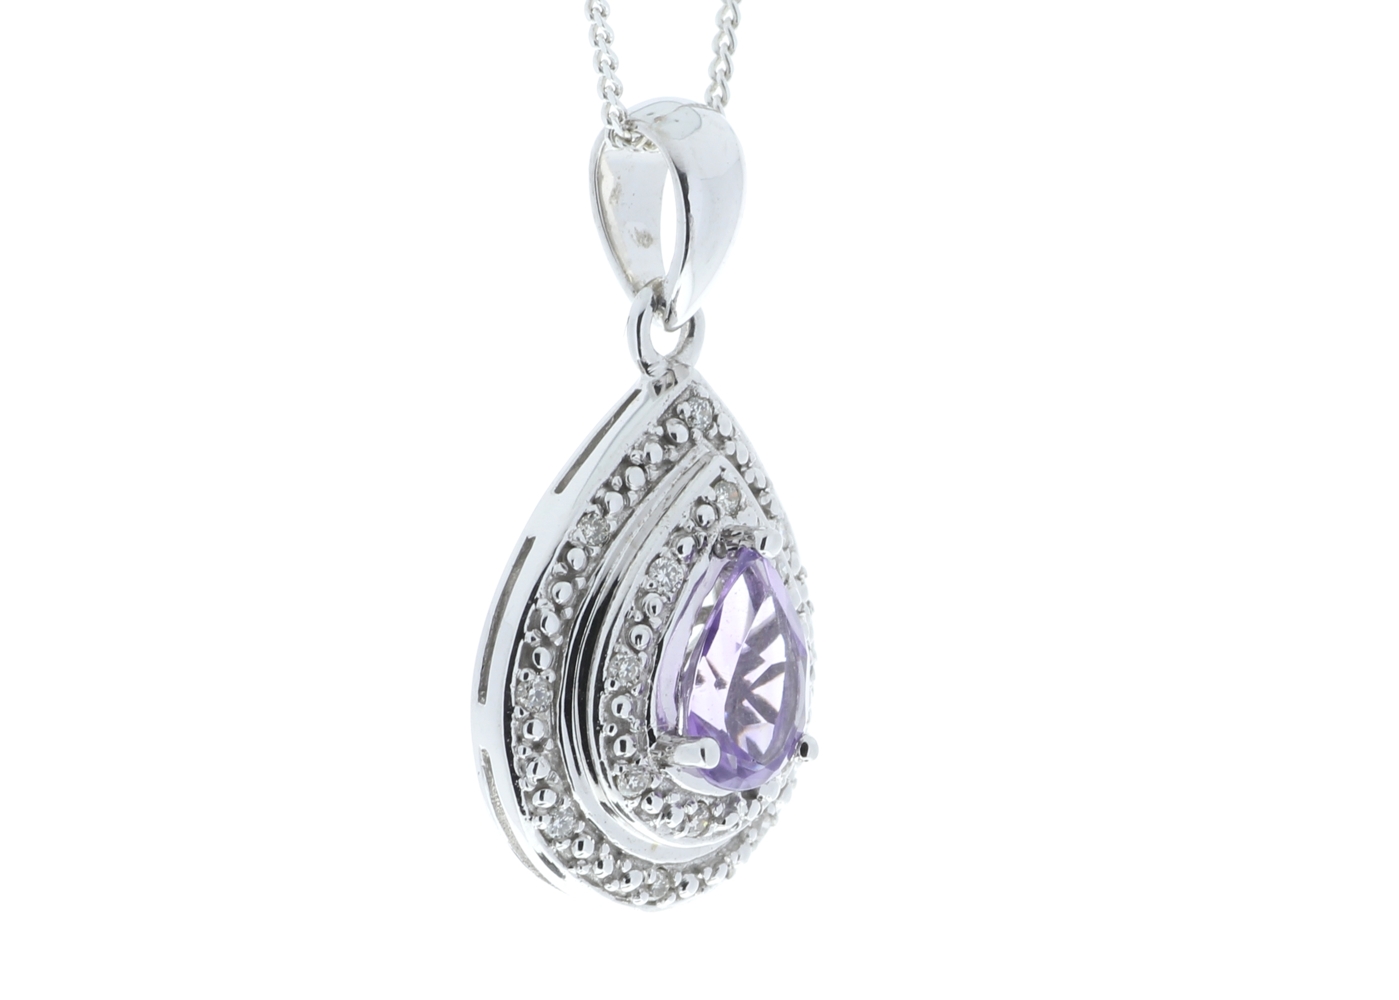 9ct White Gold Amethyst Pear Shaped Cluster Diamond Pendant - Image 2 of 4